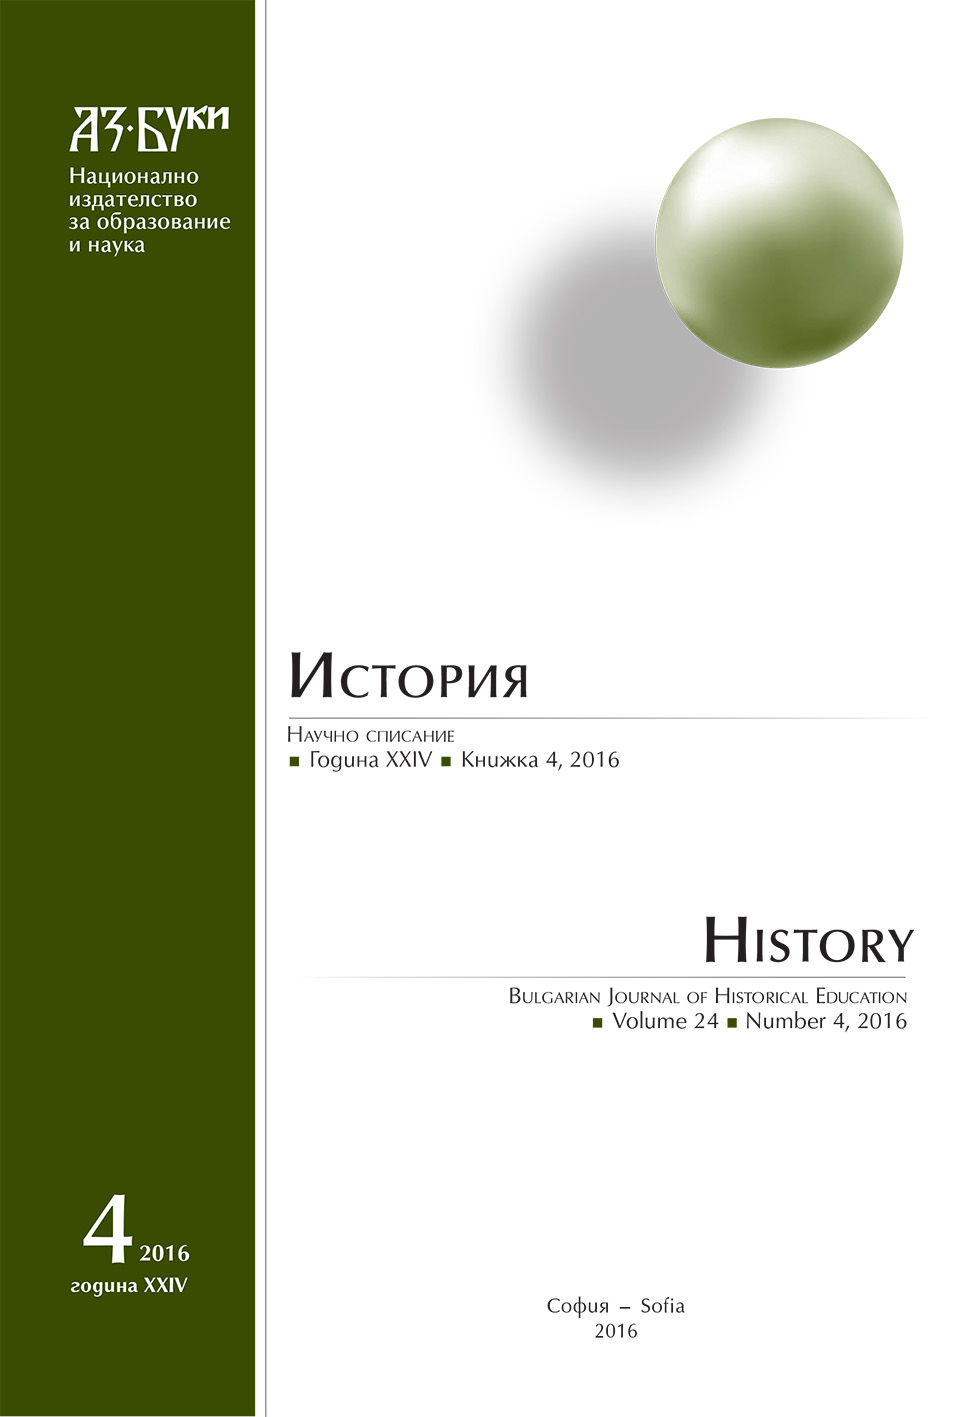 Alexander Tatsov – One of the „Builders of Modern Bulgaria“ Cover Image